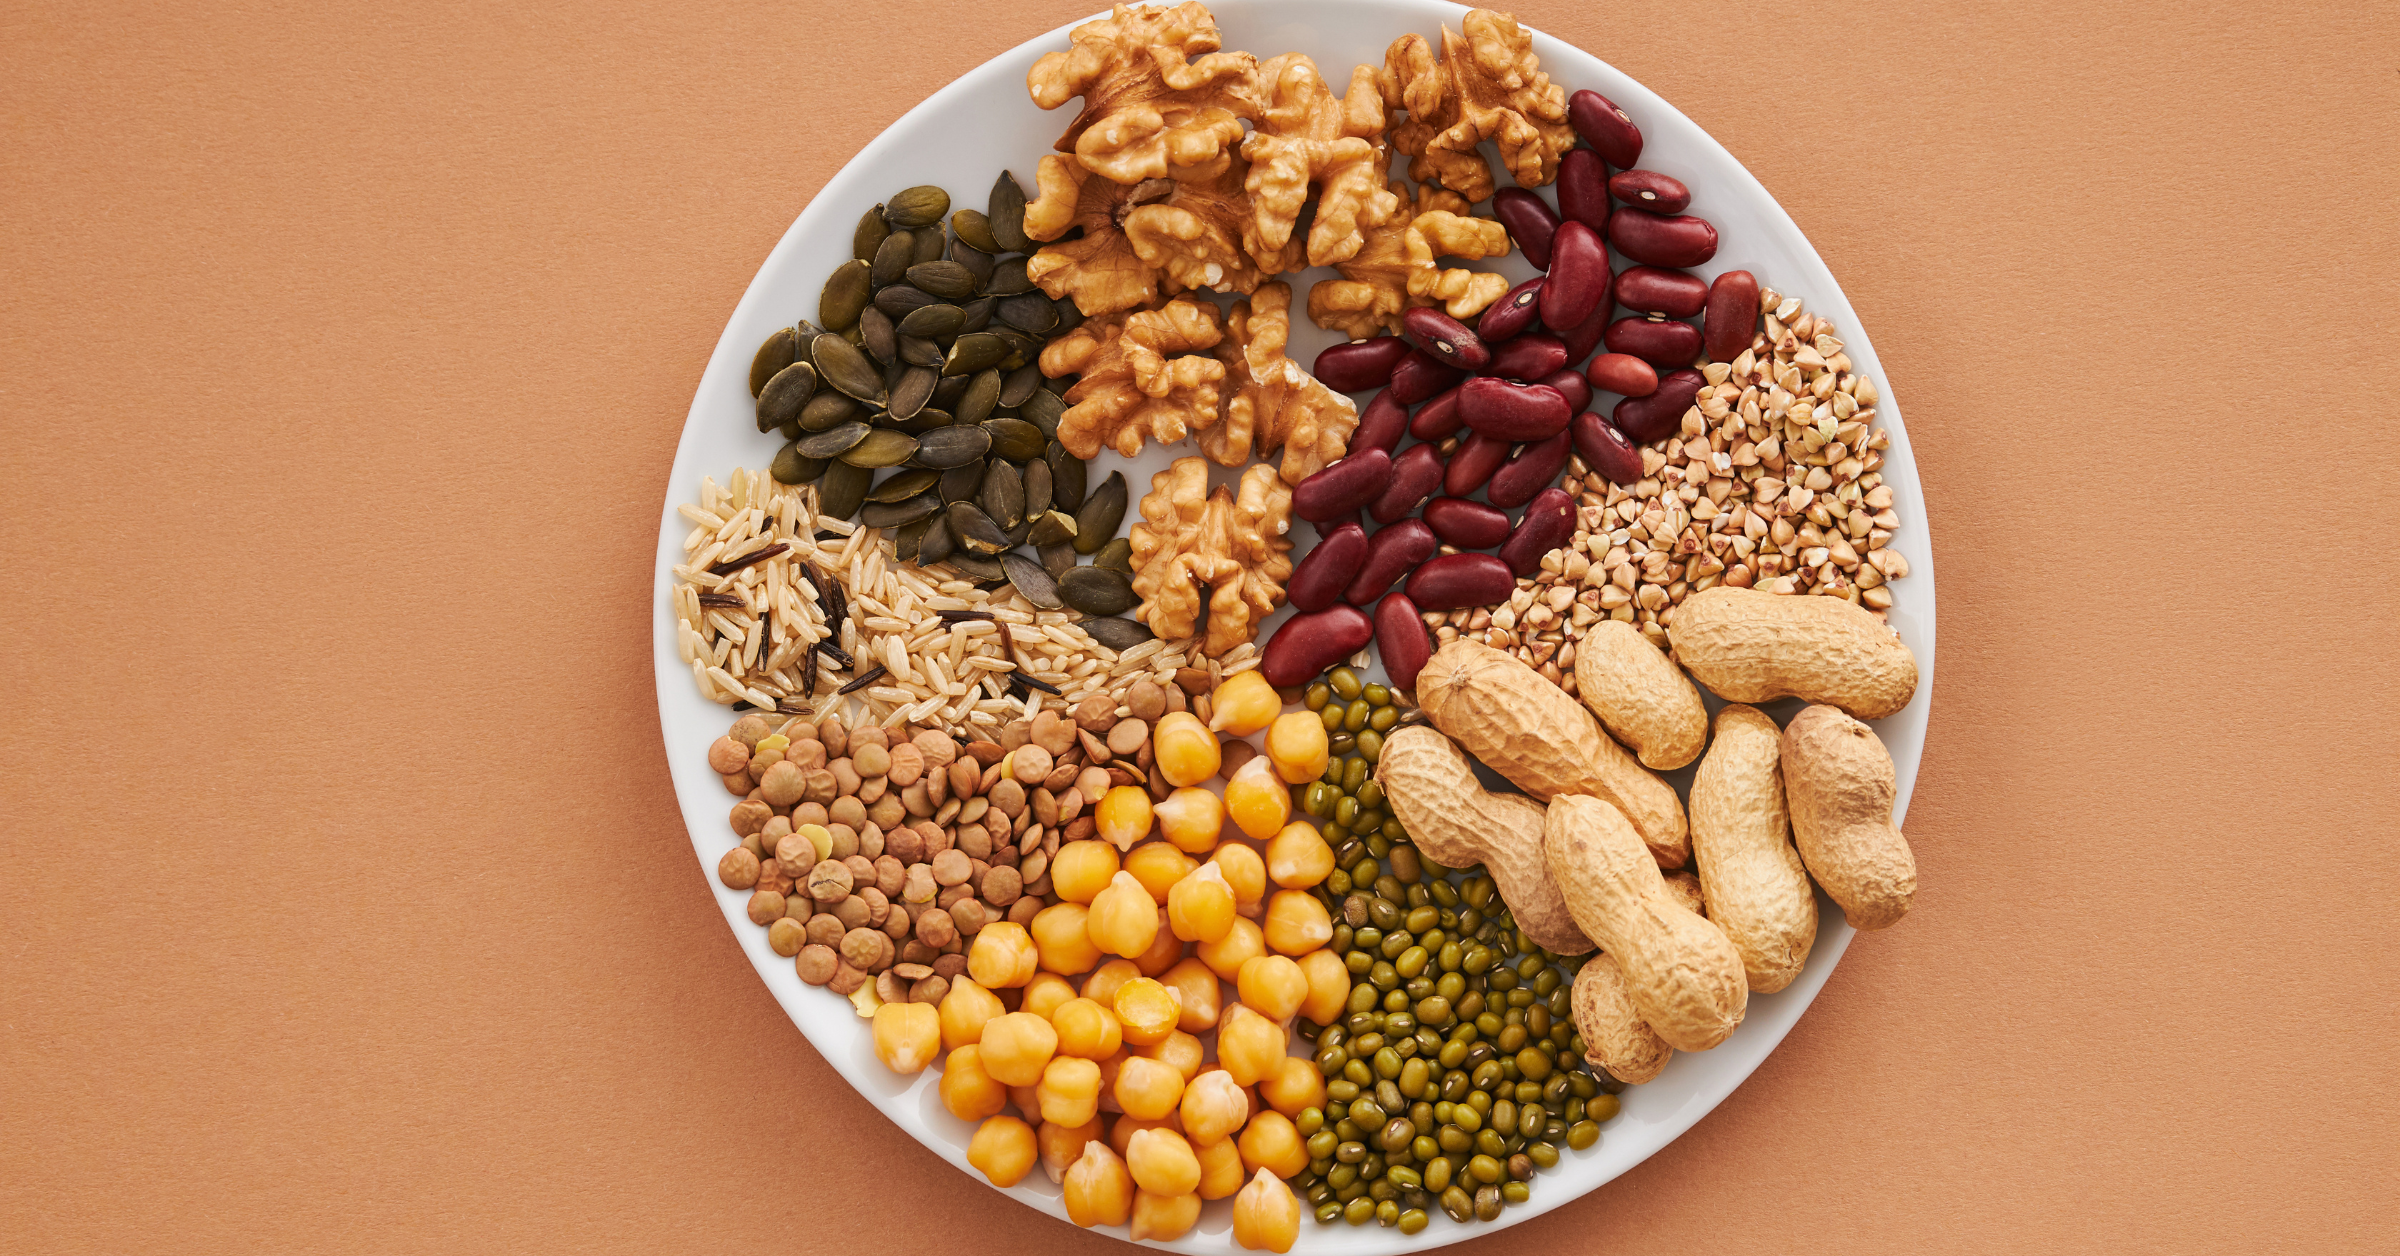 Different types of nuts & dry-fruits are placed on a white plate.